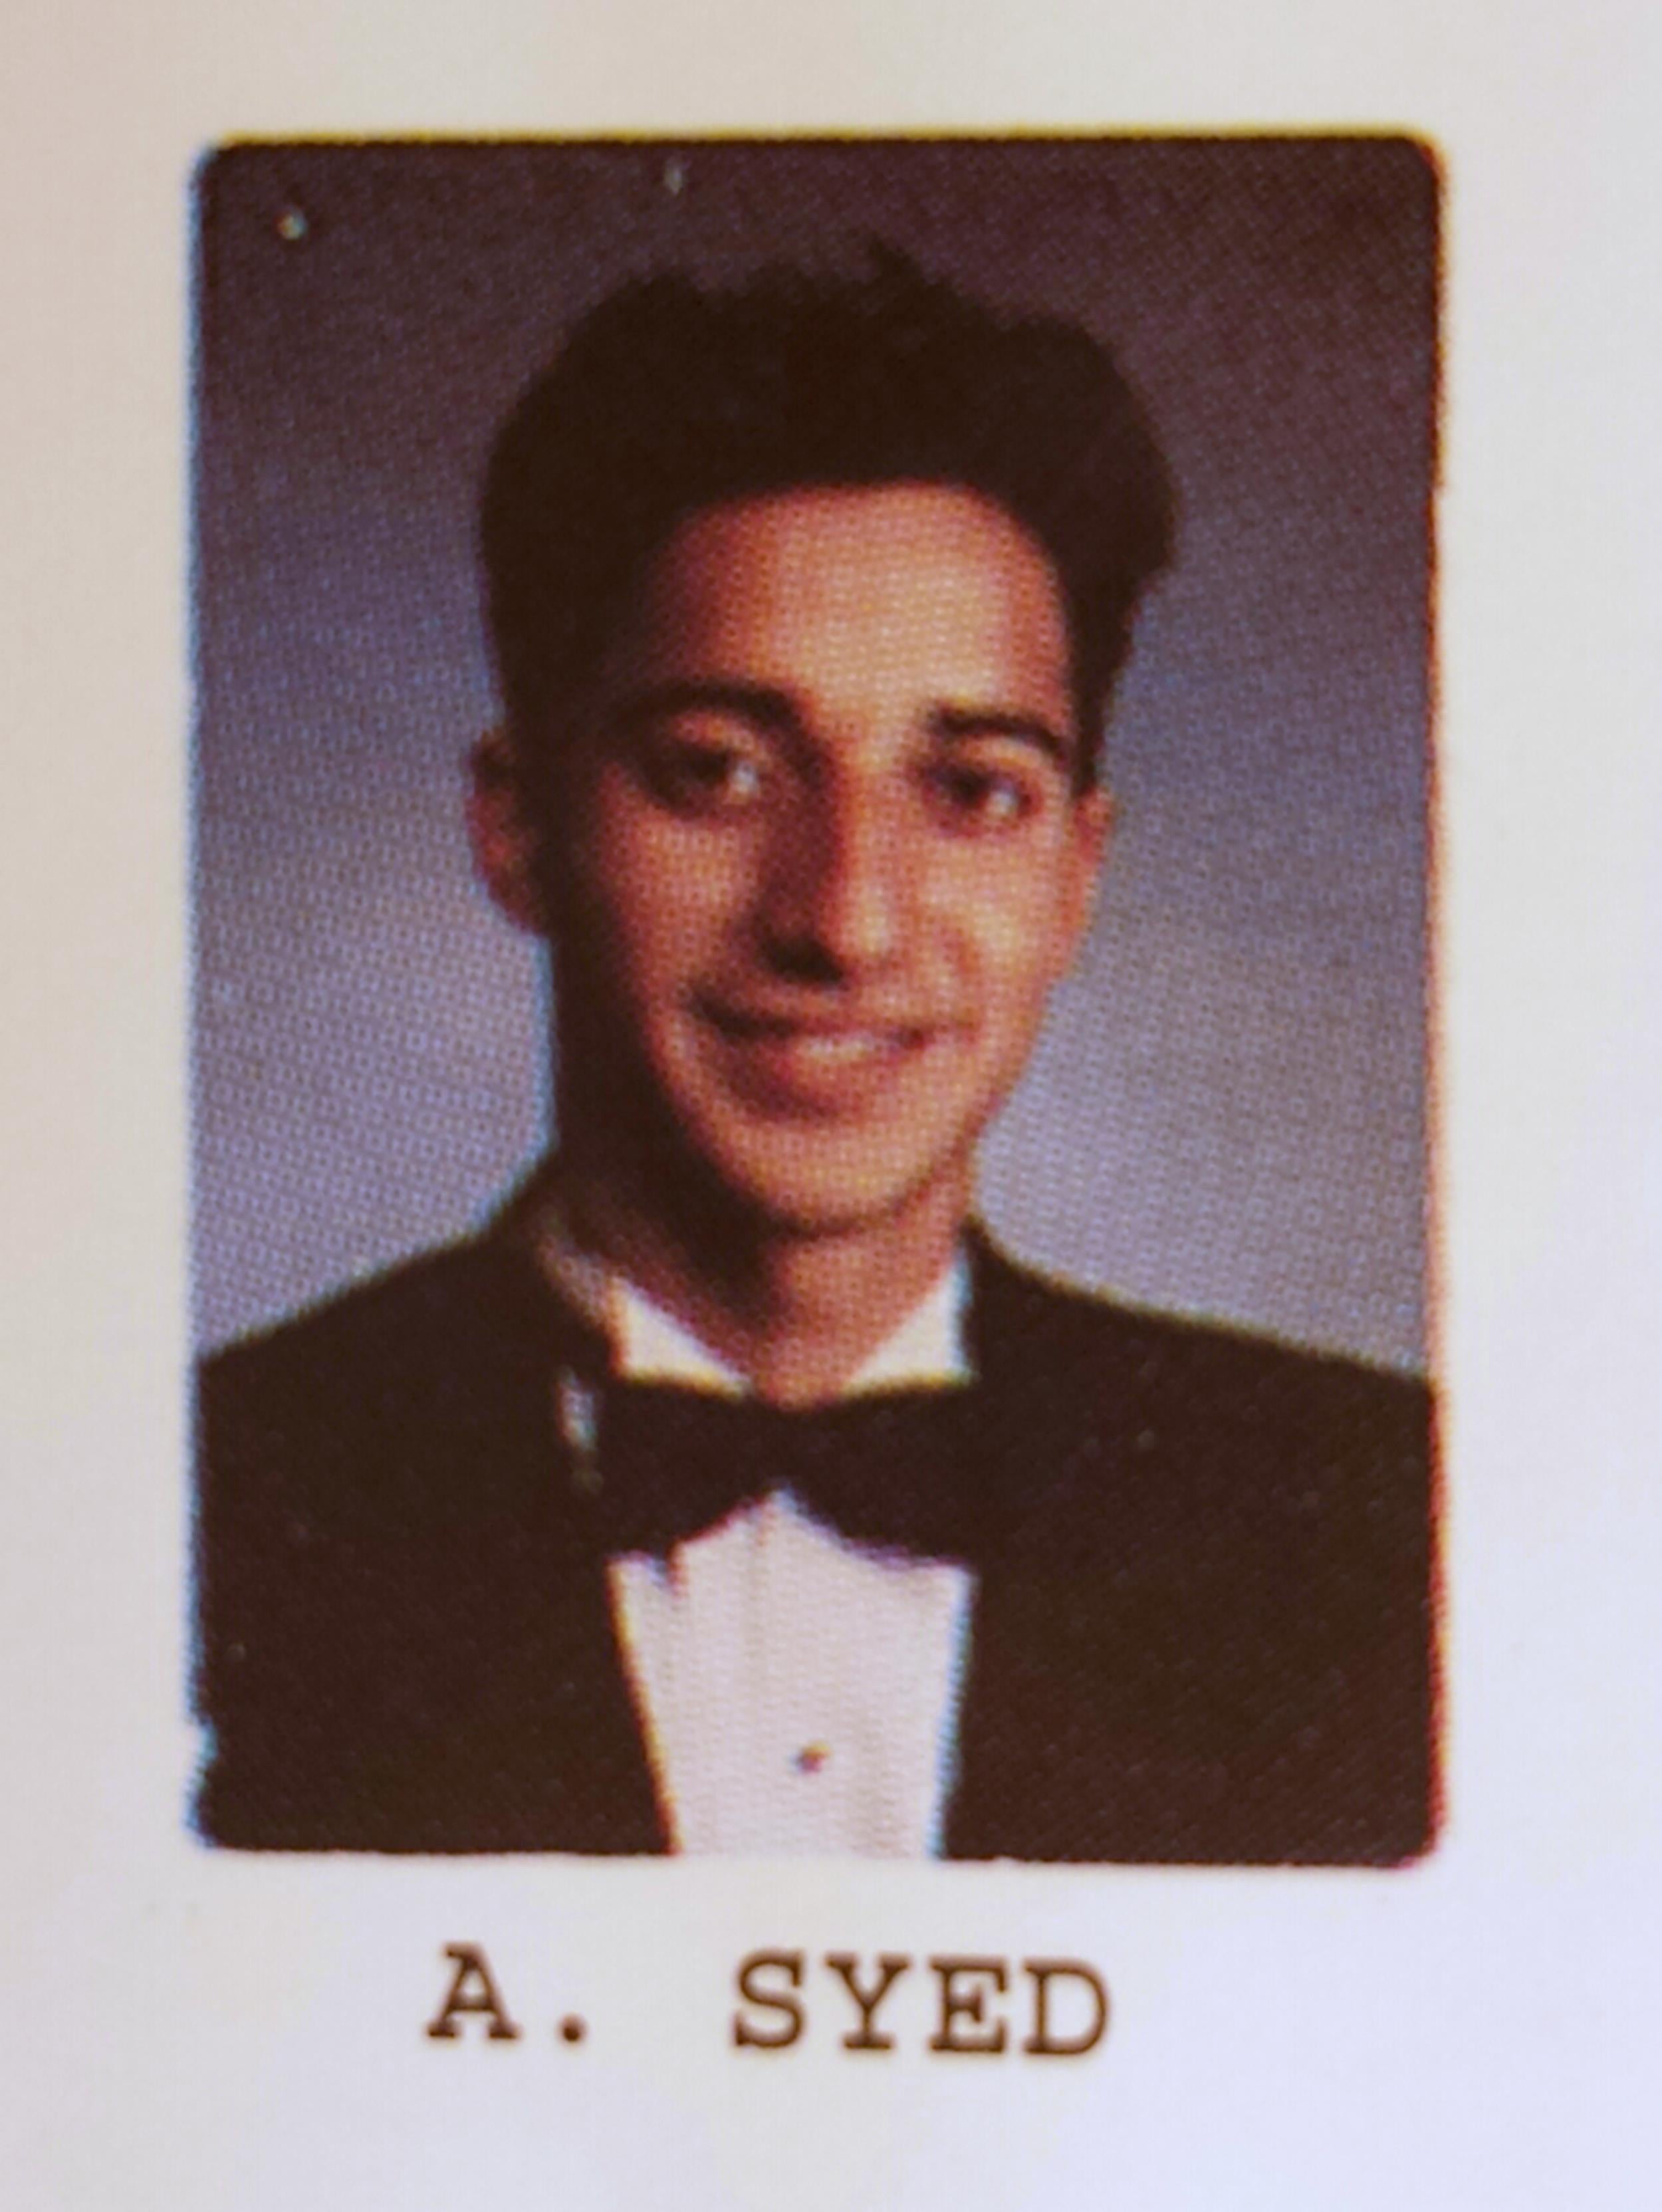 Adnan Syed is pictured prior to his arrest and conviction for murder